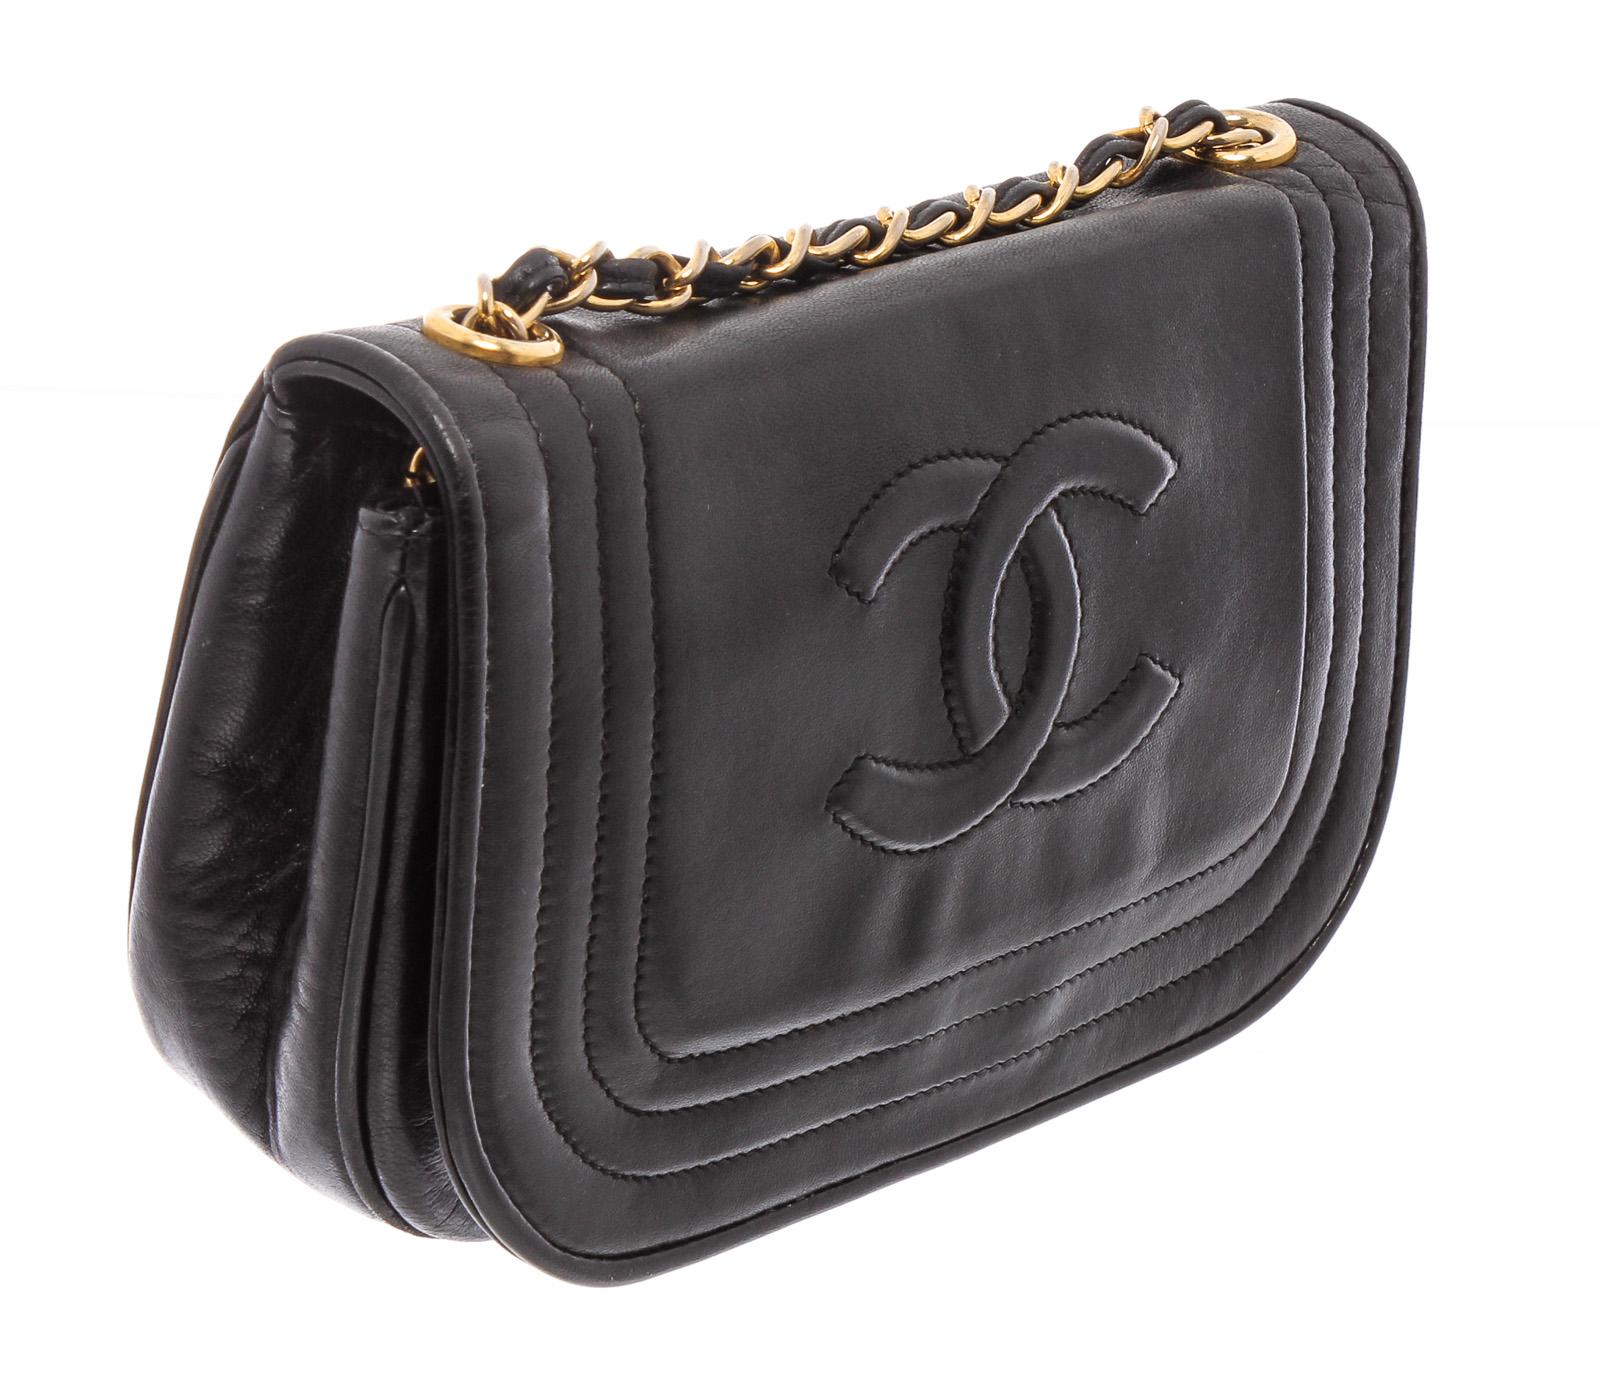 Black leather Chanel Vintage CC half moon shoulder bag with gold-tone hardware, single woven chain and leather shoulder strap, black leather lining, one zip pocket at interior wall and overall flap with button snap closure.

21445MSC